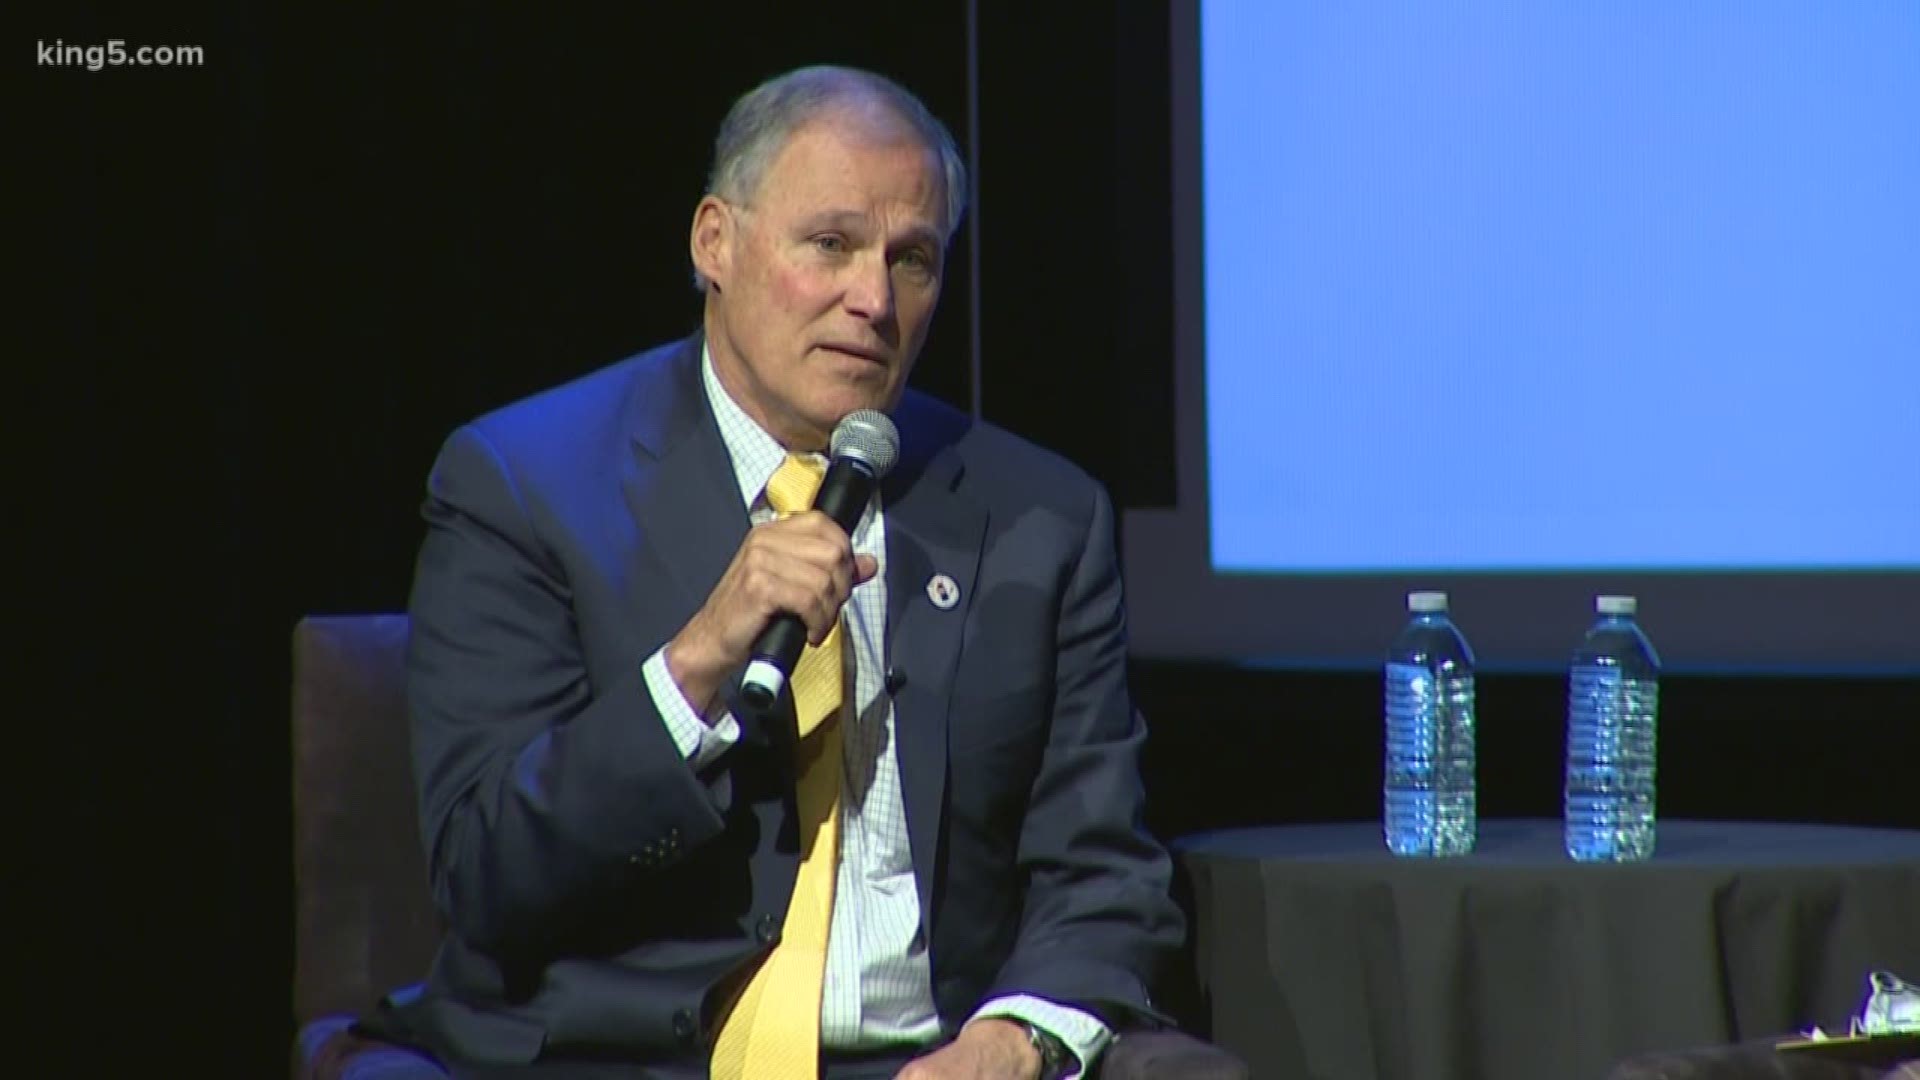 Washington Governor Jay Inslee said Thursday night he is "seriously thinking" about a 2020 presidential run.